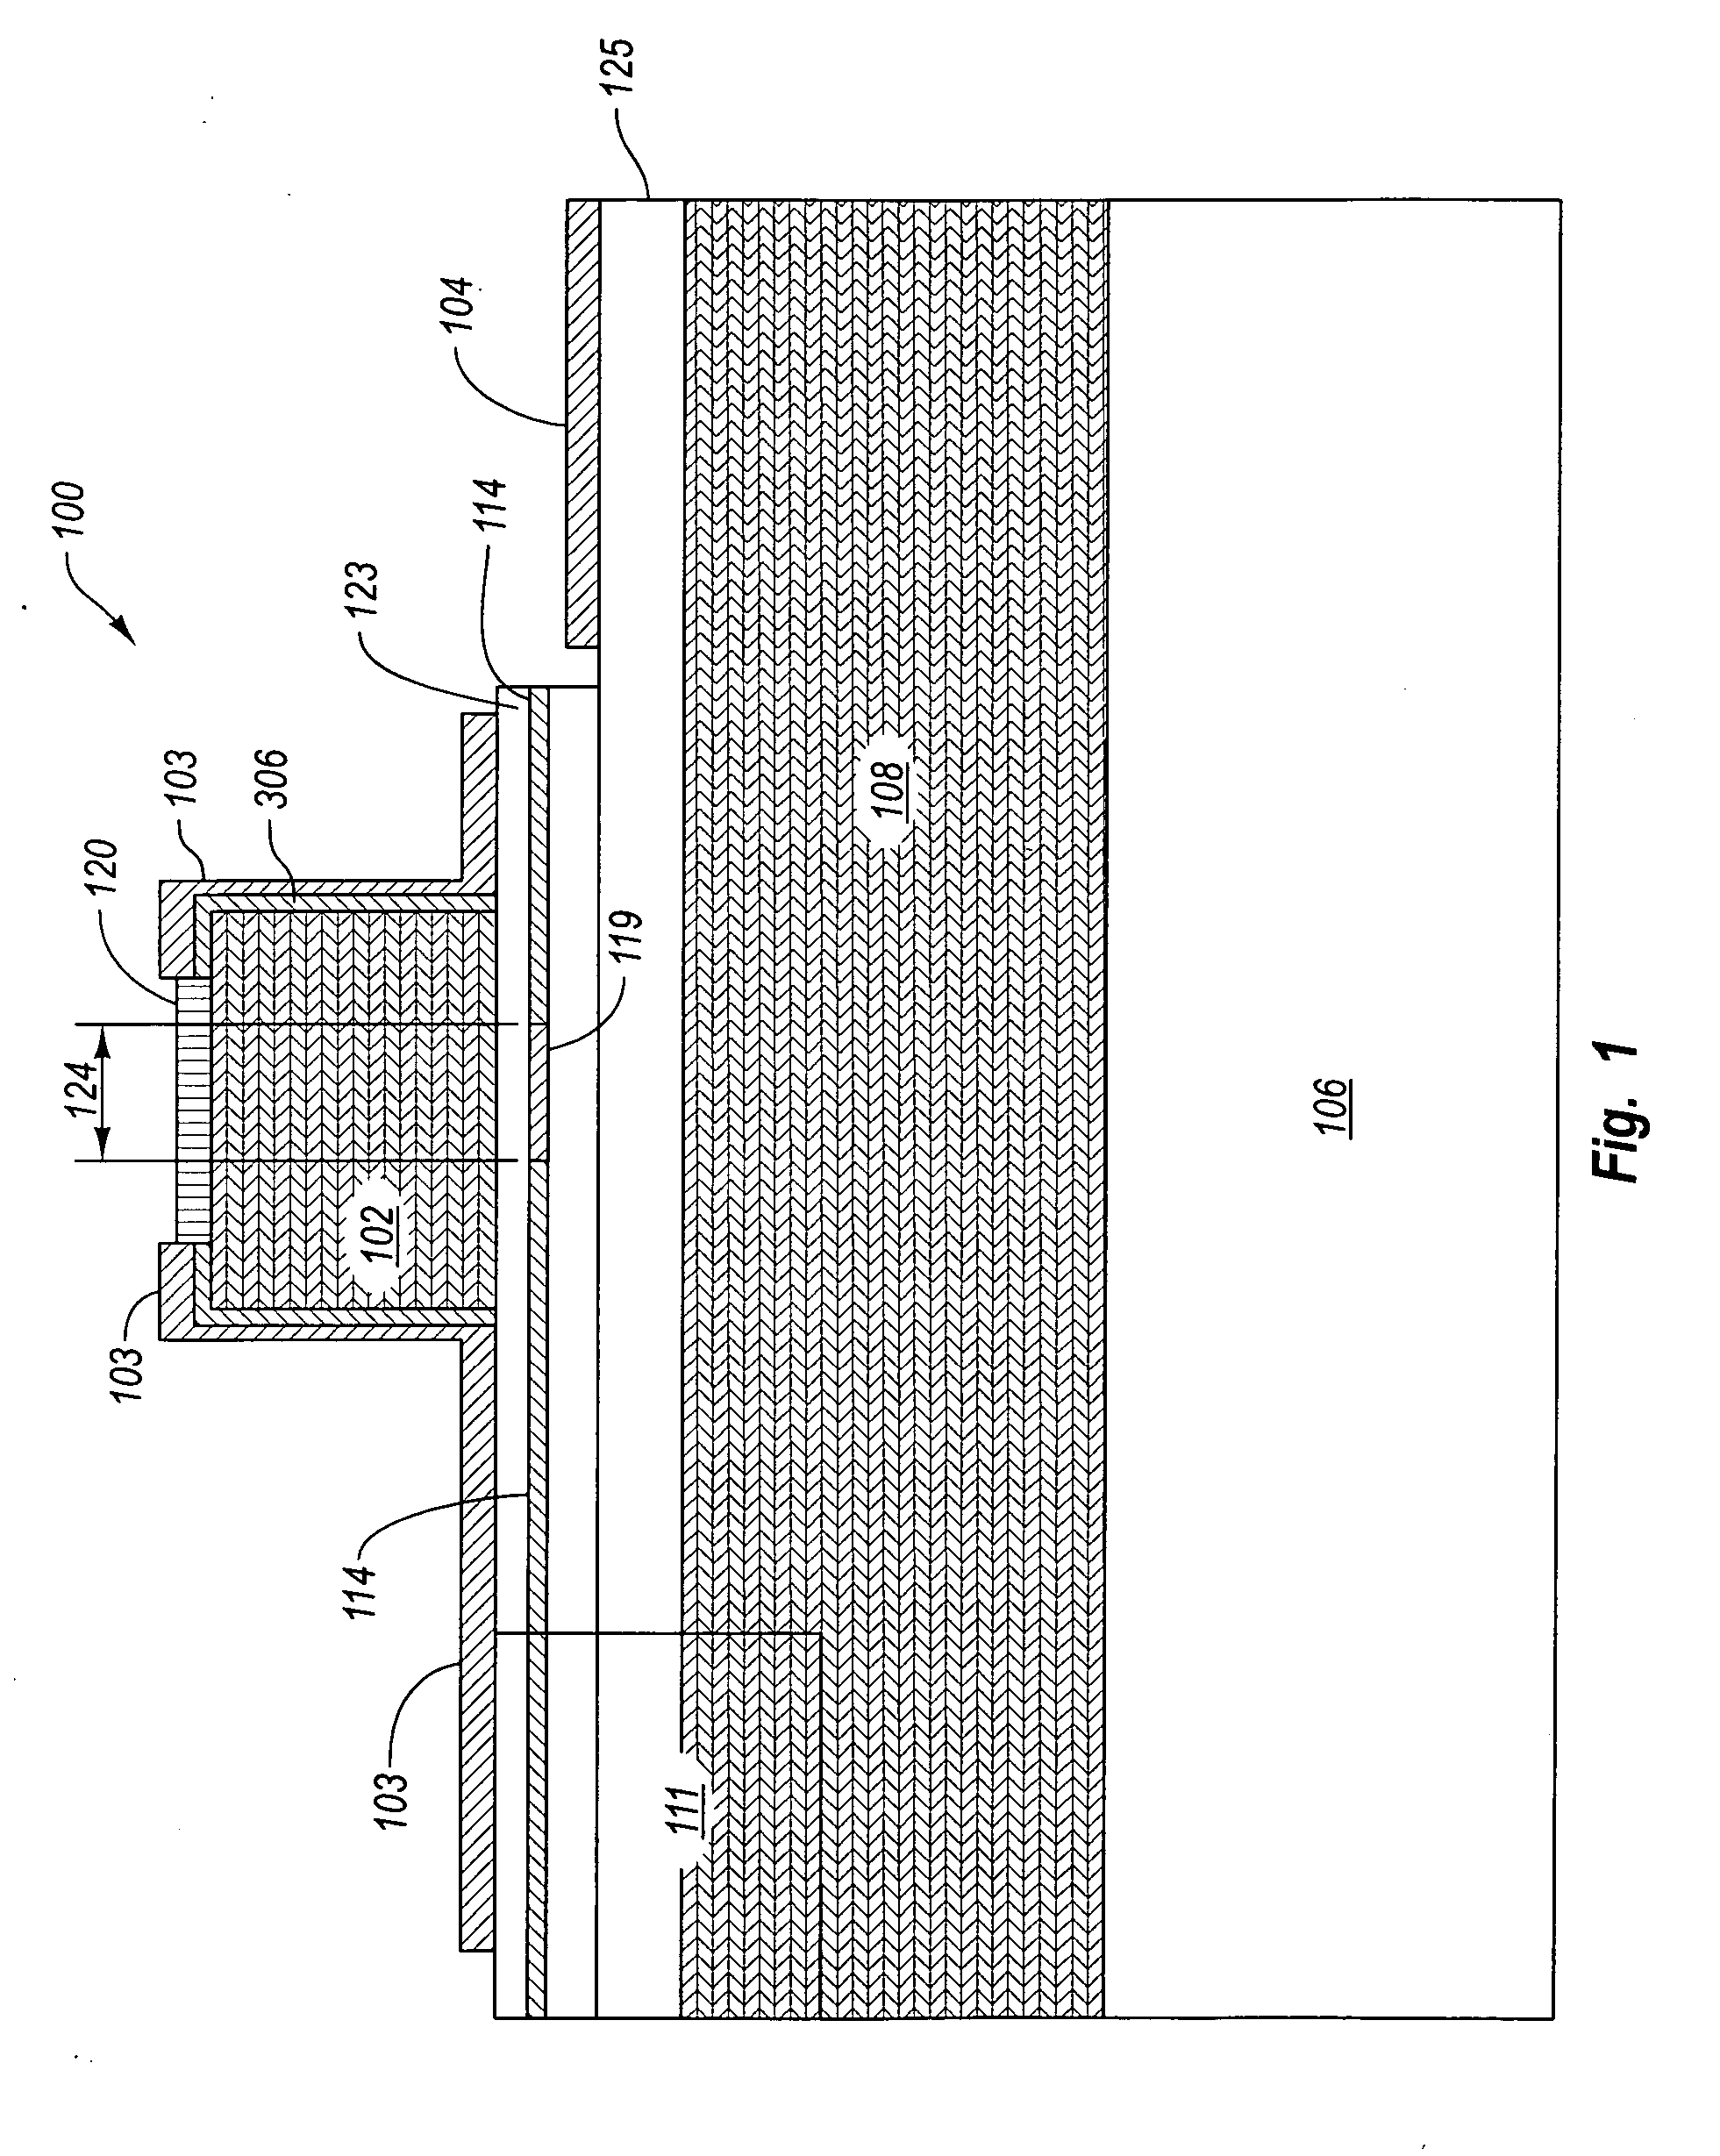 Vertical cavity surface emitting laser having multiple top-side contacts